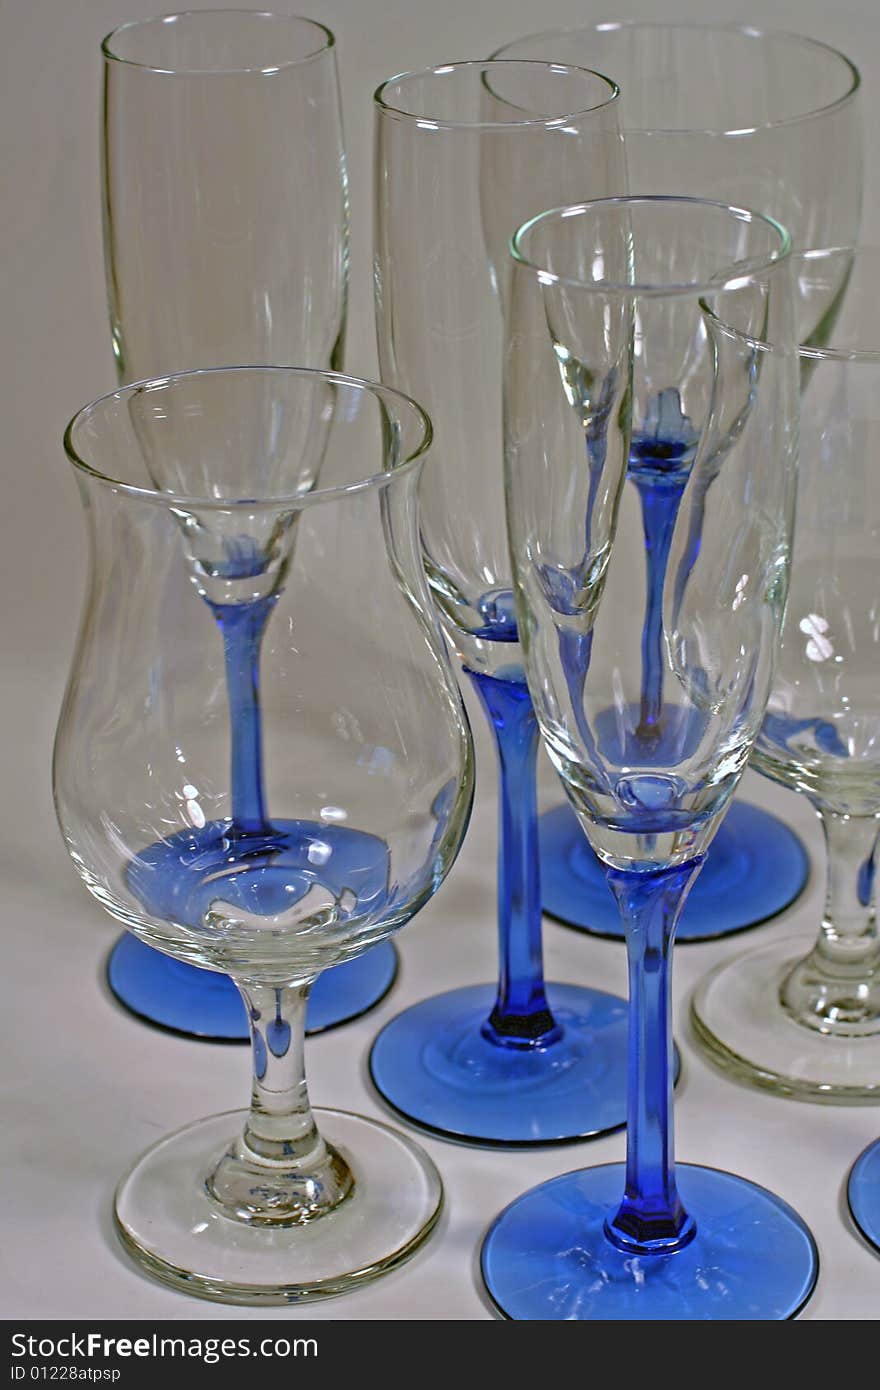 Several clean and shiny wine glasses with blue stems isolated and ready for a party!. Several clean and shiny wine glasses with blue stems isolated and ready for a party!